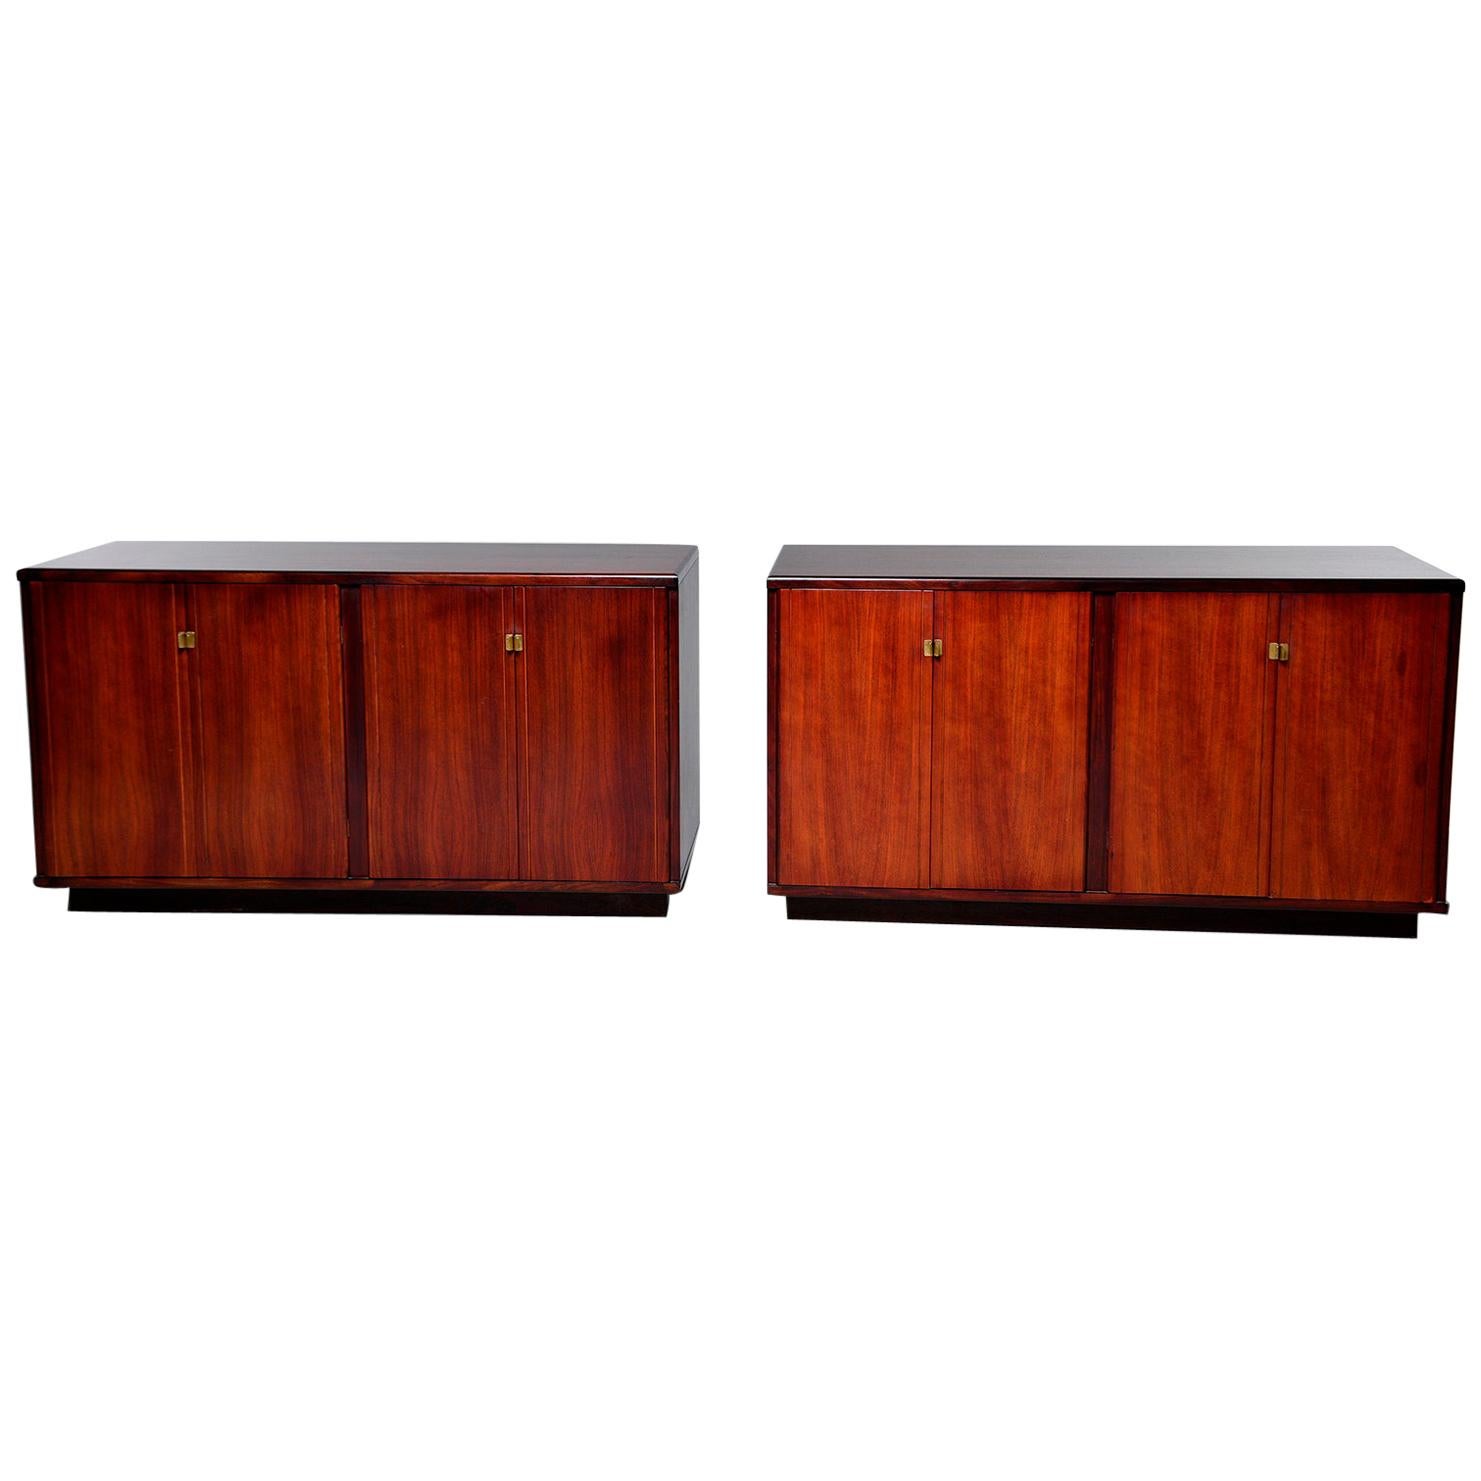 Pair of Midcentury Italian Rosewood Cabinets With Ebony Detailing